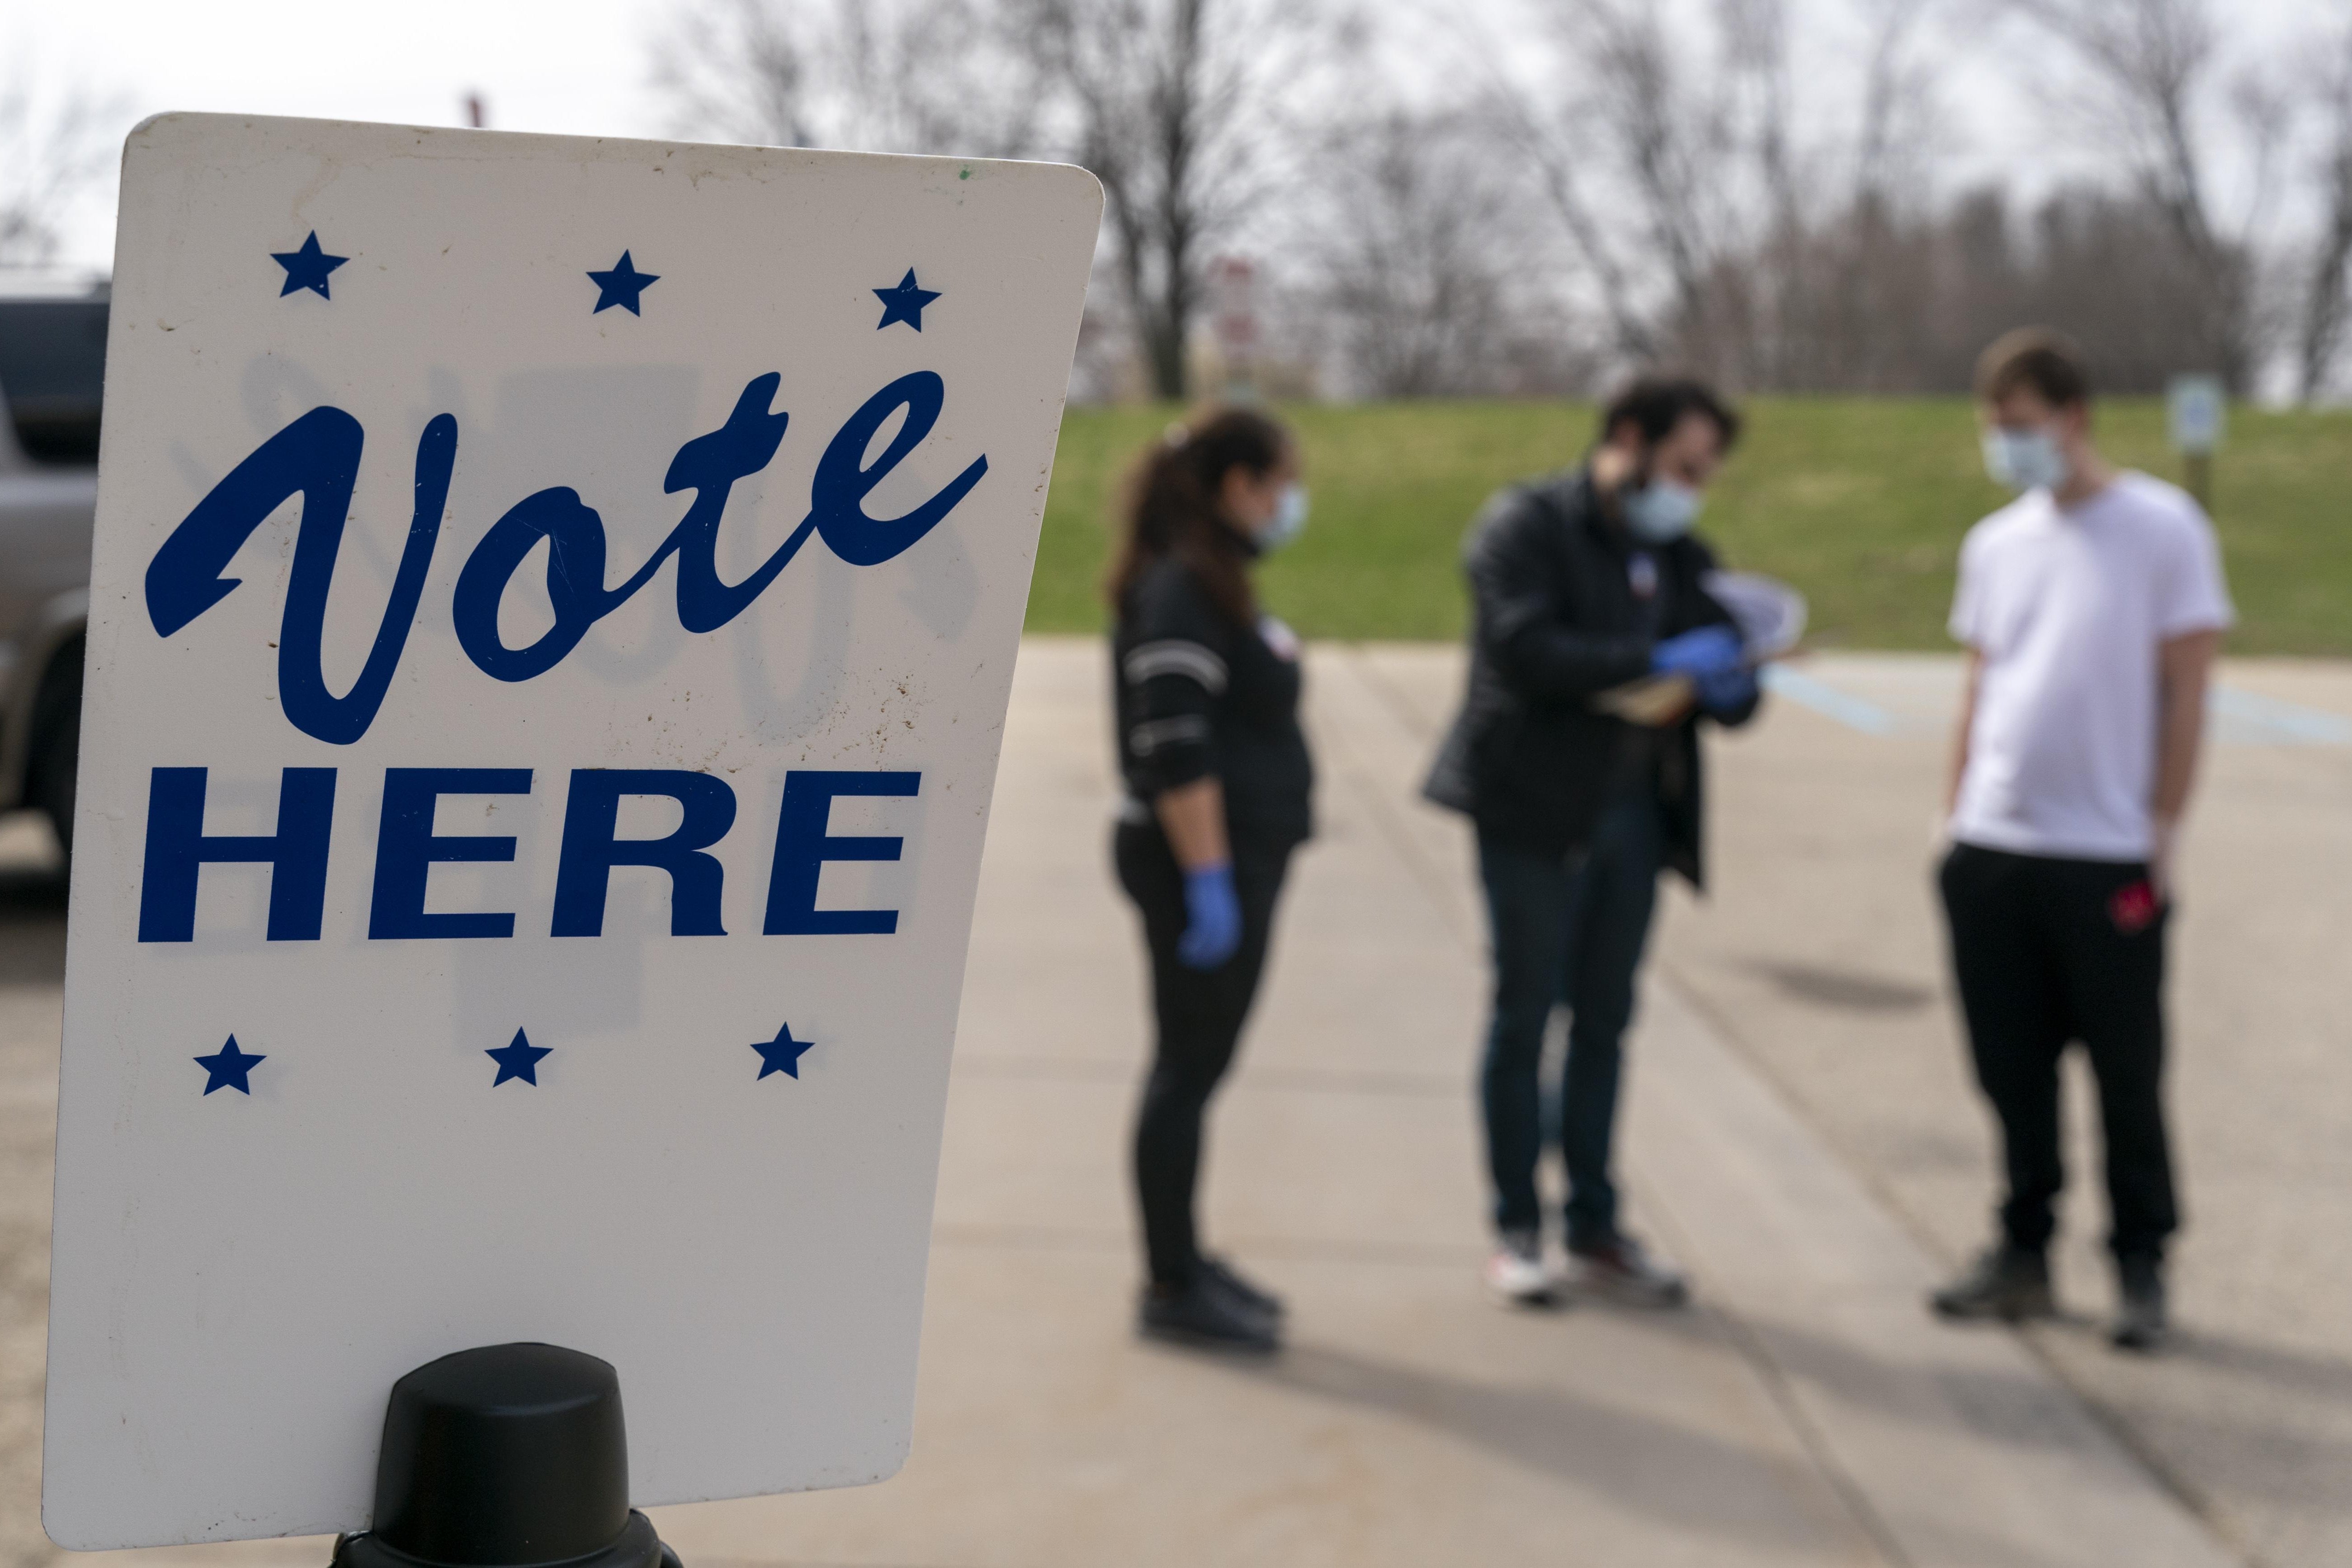 A "vote here" sign in front of three people standing in front of a polling place in Madison, Wisconsin during the 2020 election.